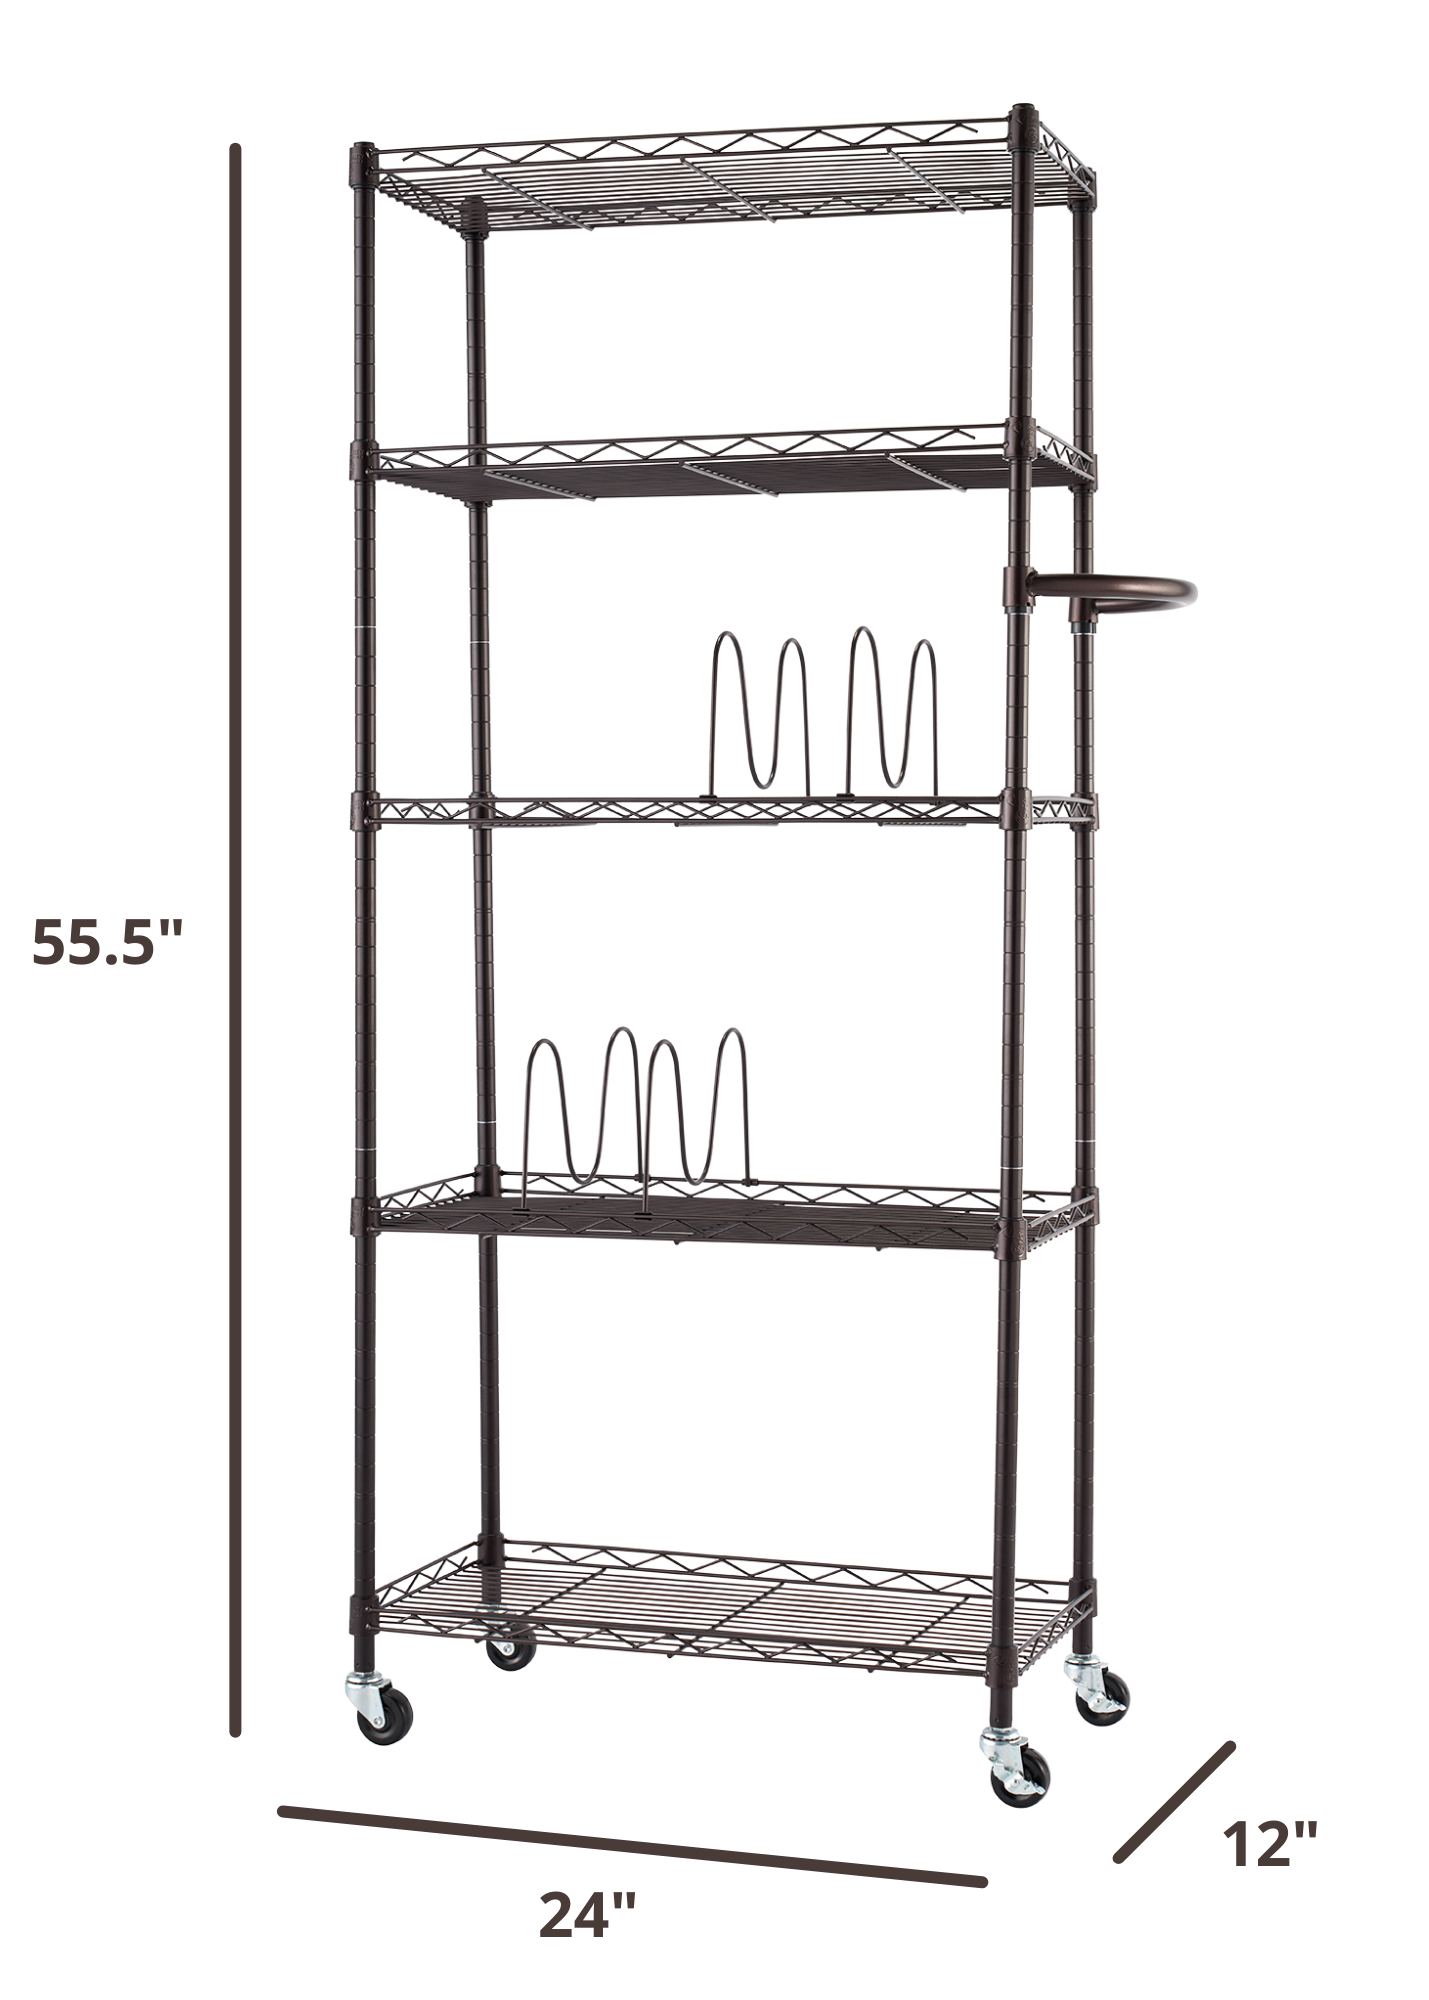 55 inches tall by 24 inches wide by 12 inches deep pantry rack